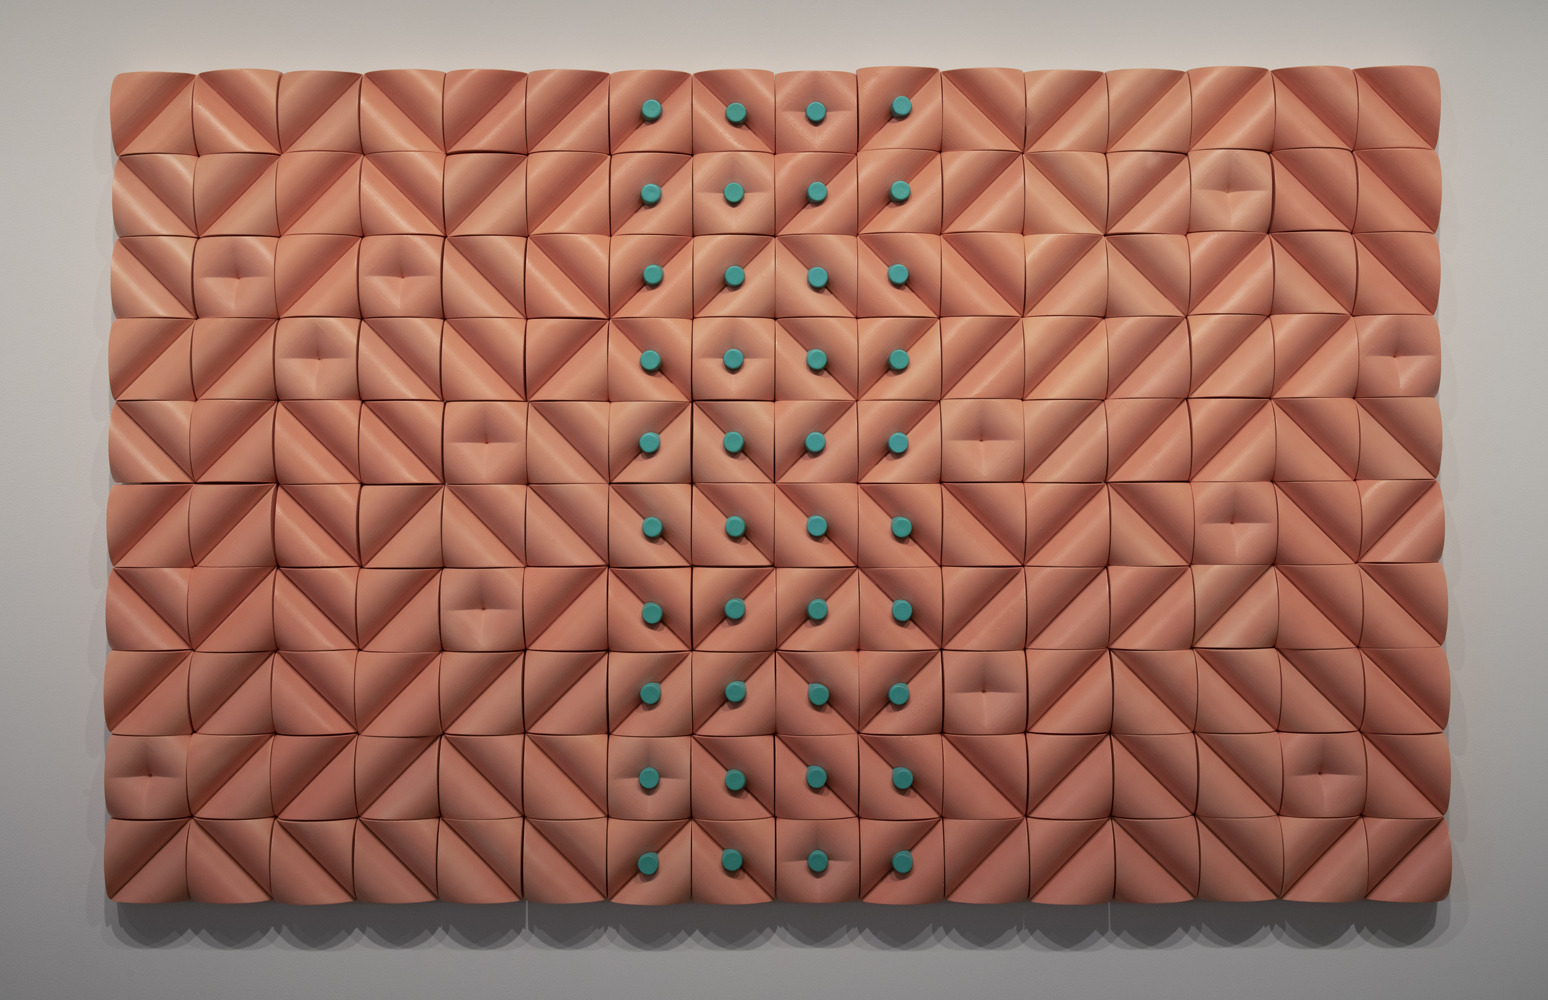 a large, pink, rectangular tile piece of a geometric design featuring green dots in the middle